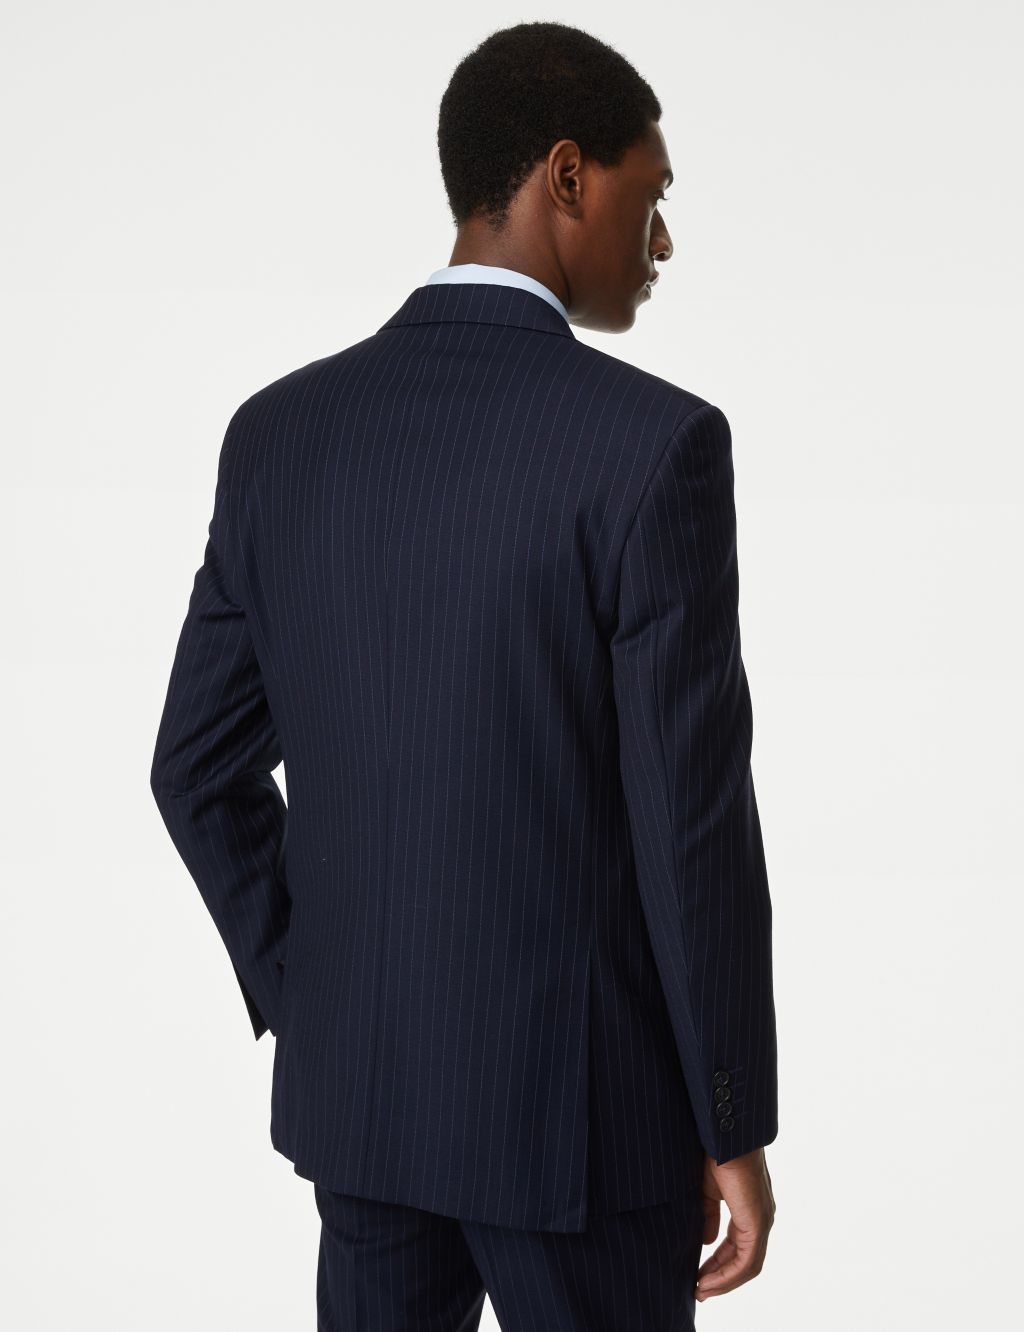 The Ultimate Tailored Fit Pinstripe Suit image 3